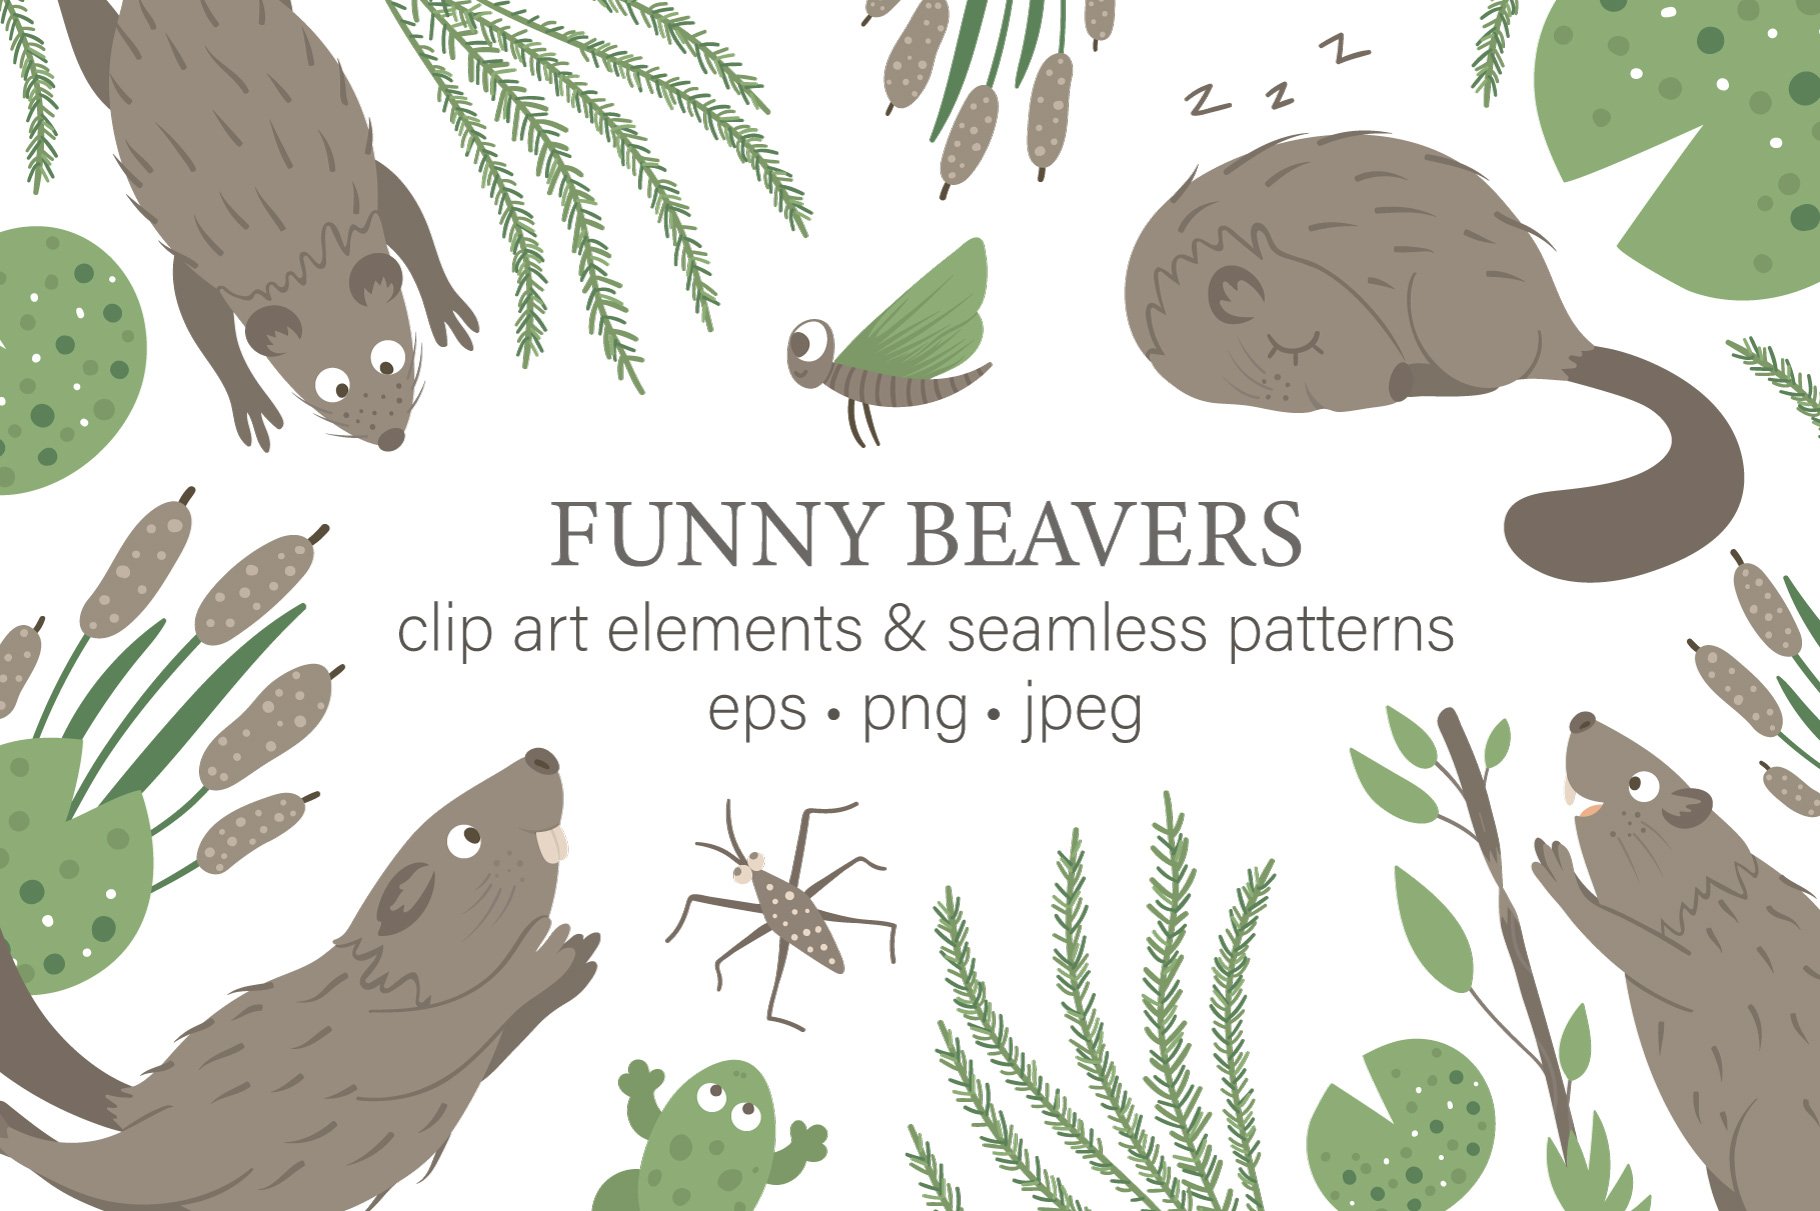 Funny Beavers cover image.